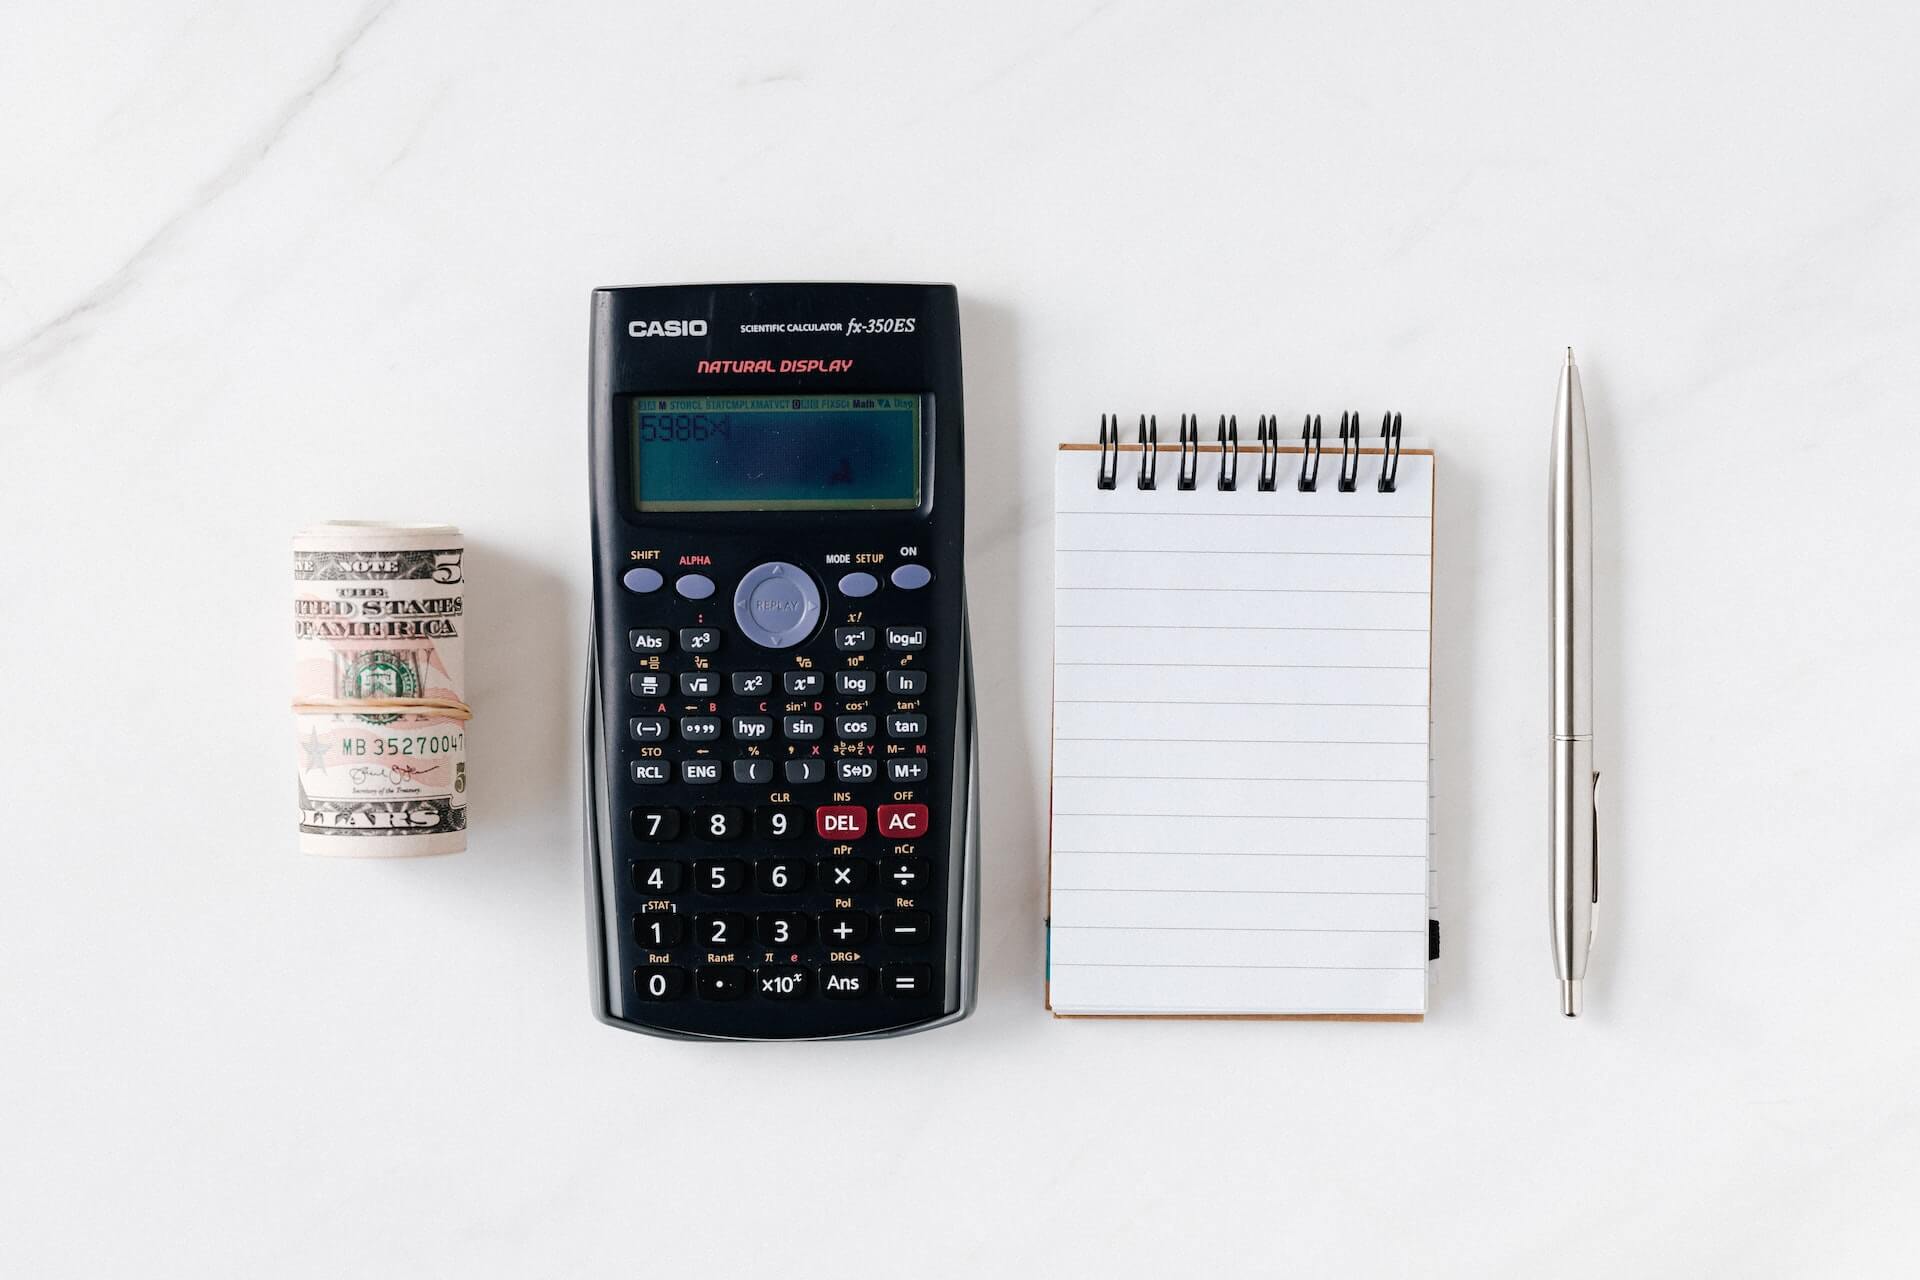 Role of USD, a Casio calculator, a small note pad, and a pen